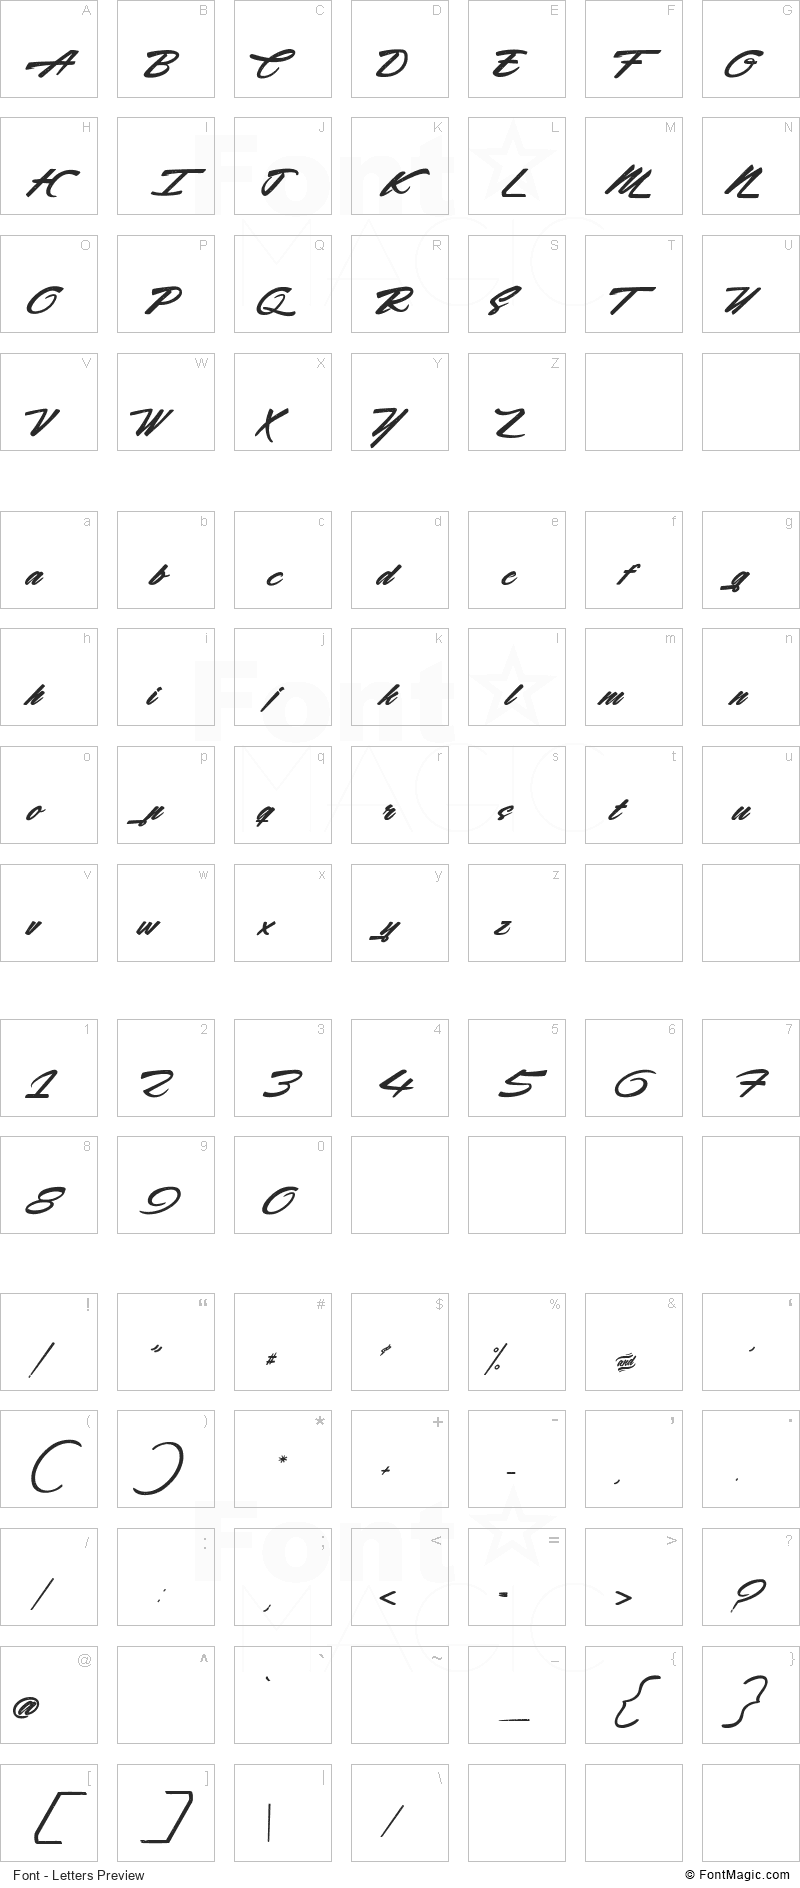 Acceleration & Reaction Font - All Latters Preview Chart